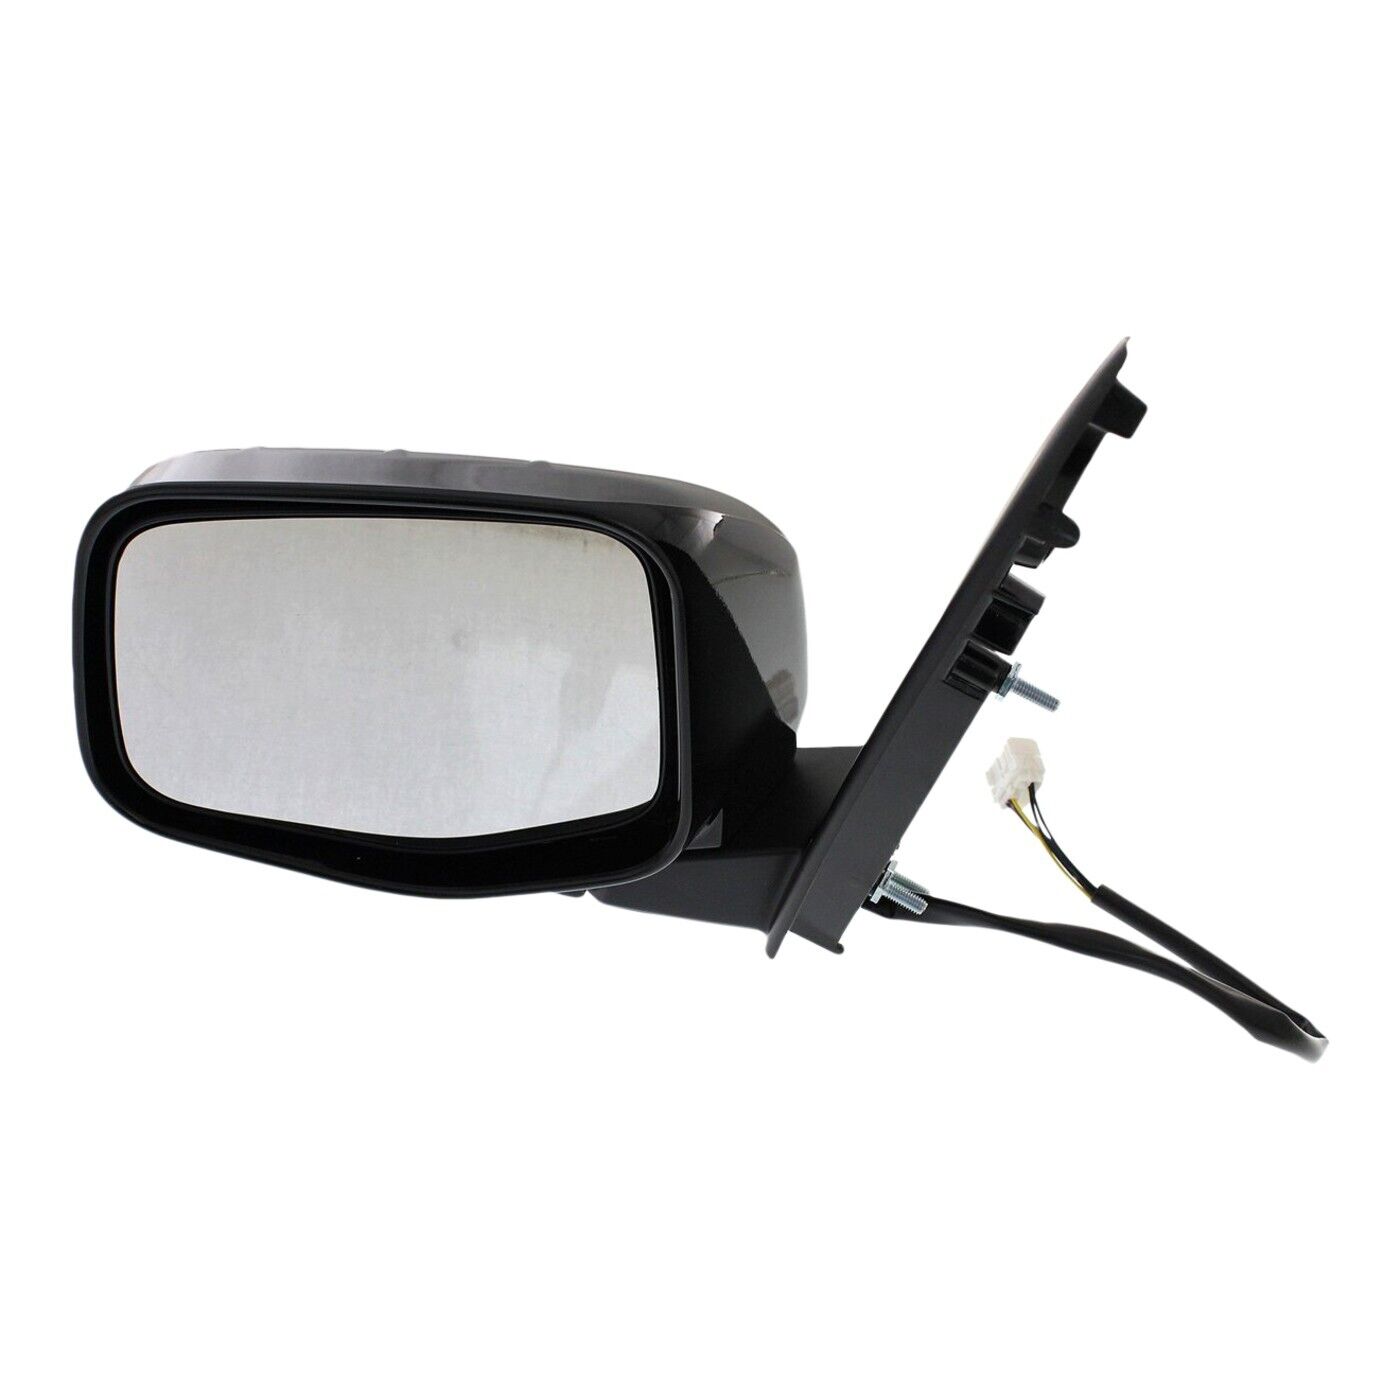 New Mirror Driver Left Side Heated LH Hand for Odyssey HO1320263 76250TK8A11ZA